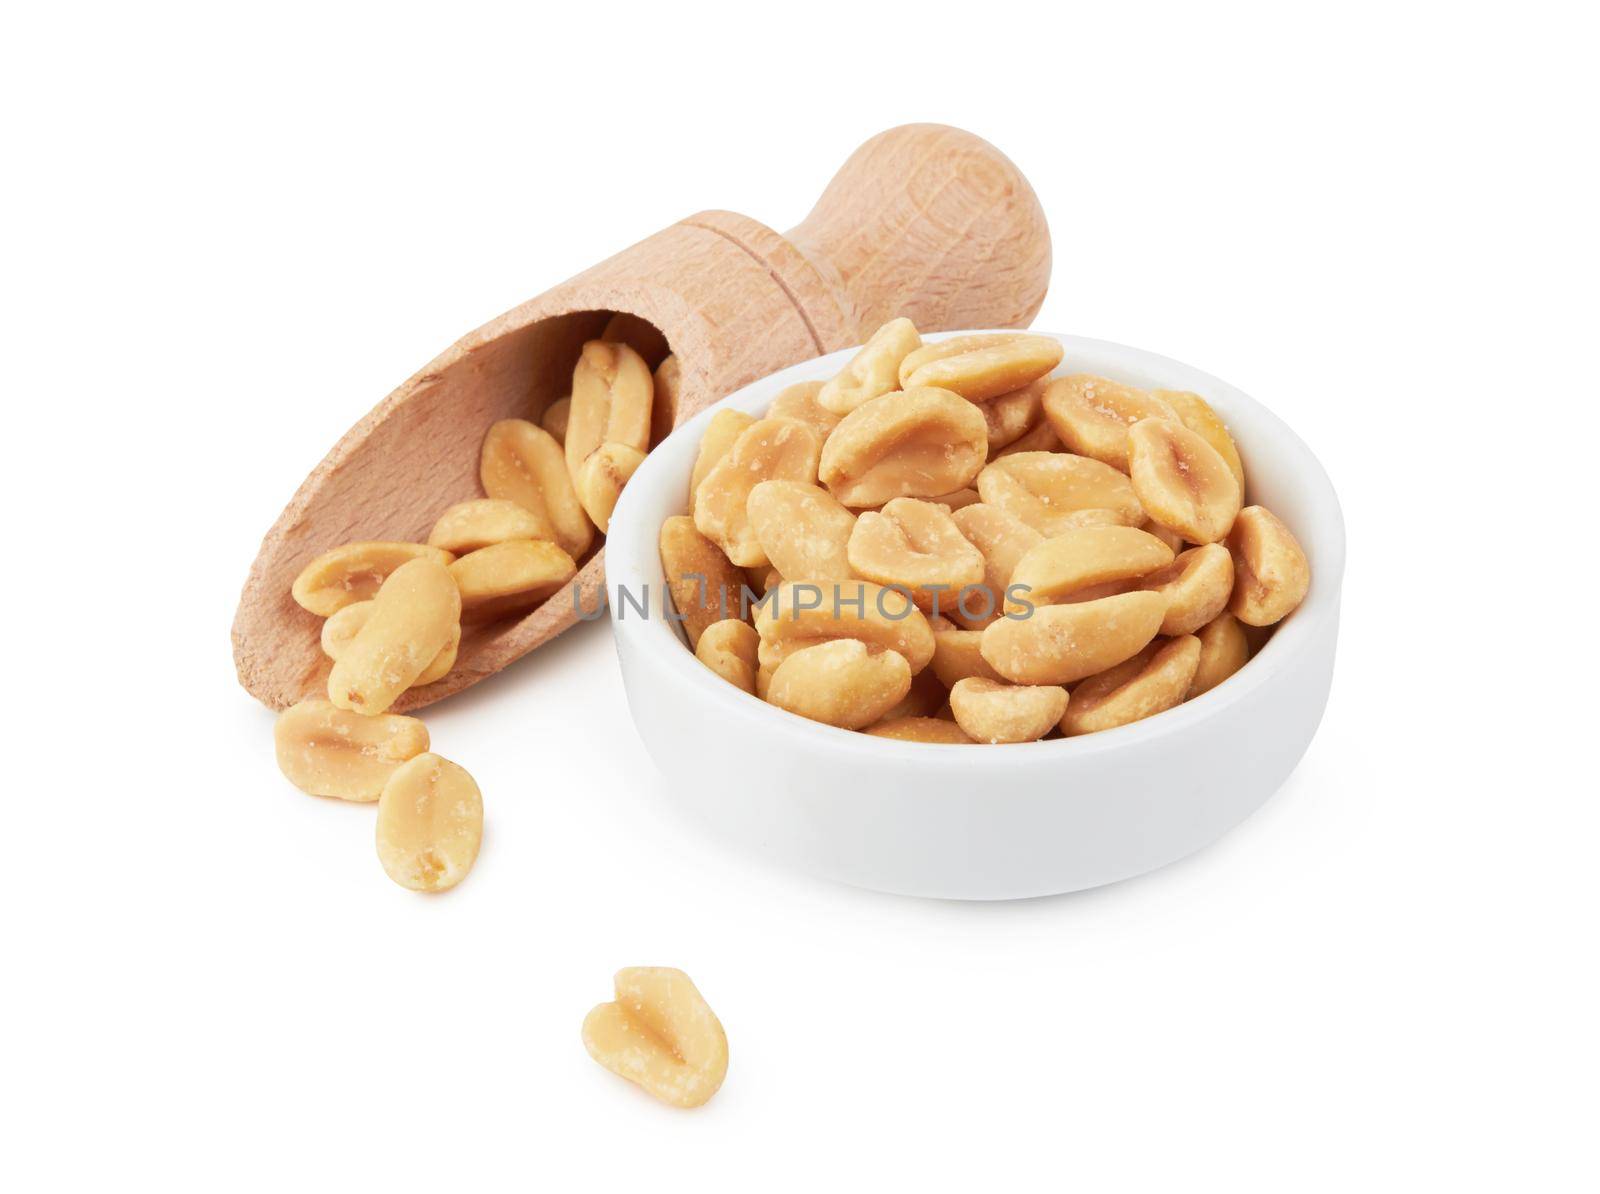 Peanuts in a bowl isolated on a white background